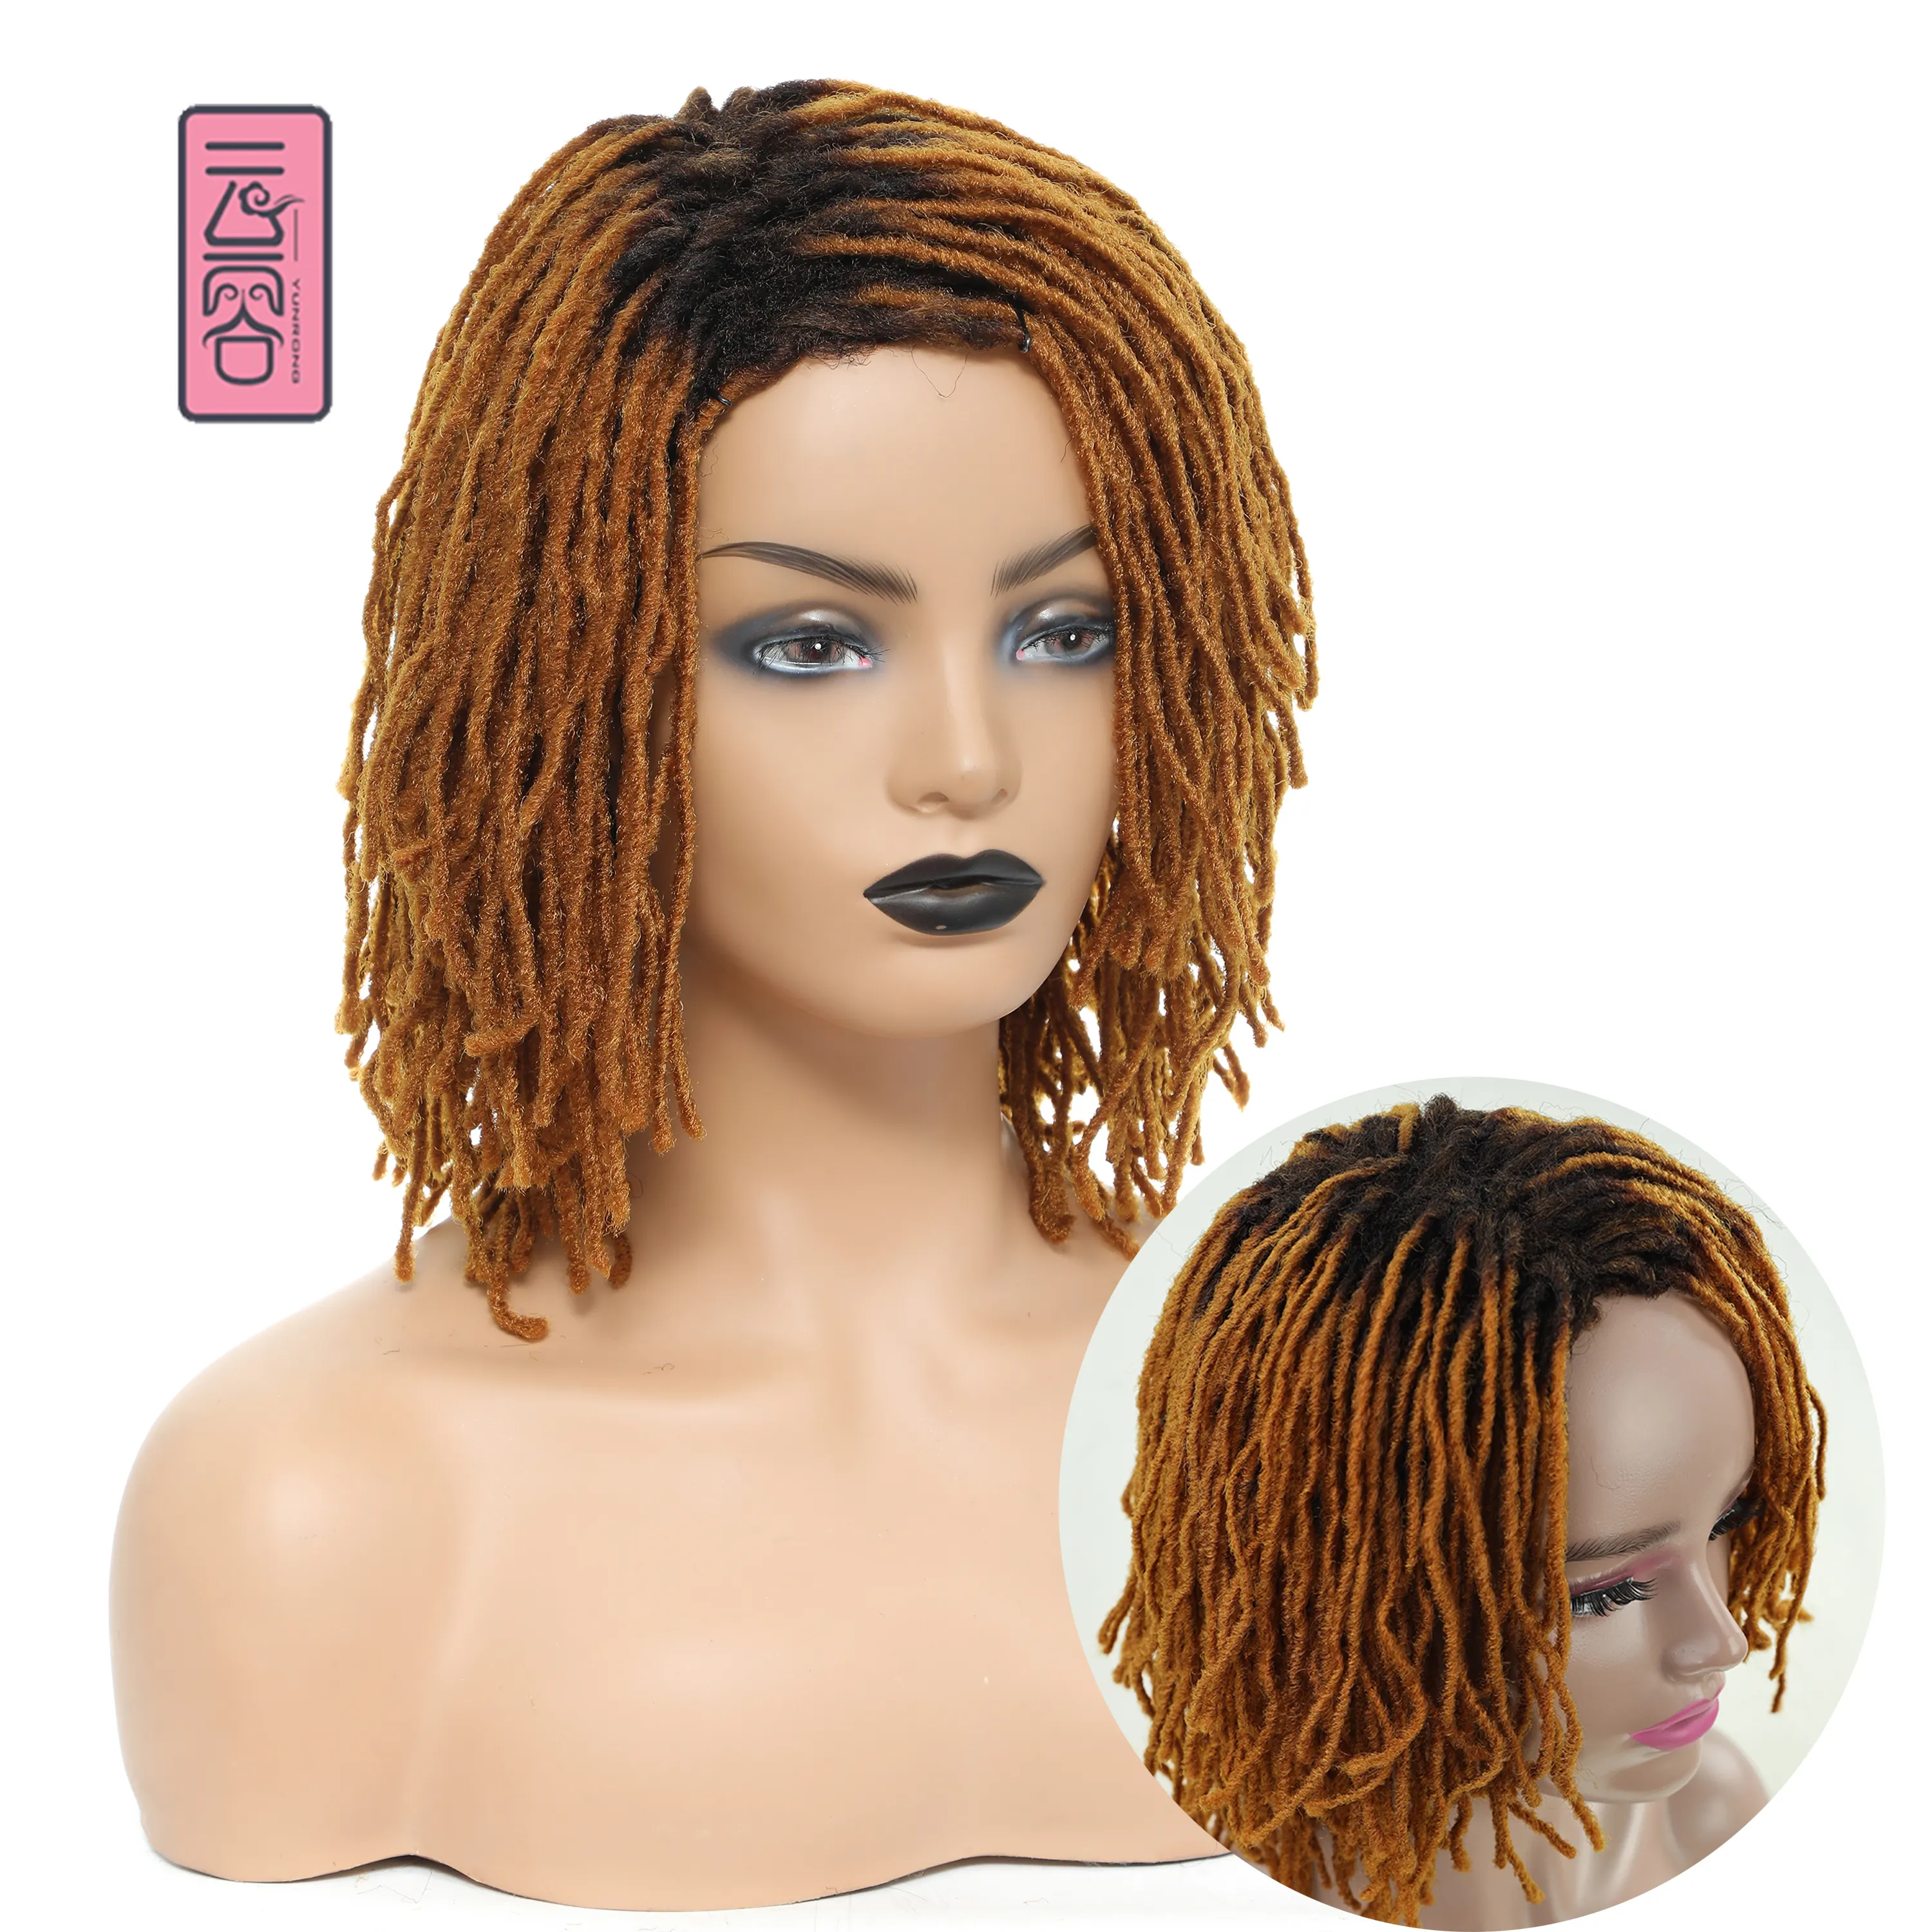 10Inches Braided Wigs Afro Bob Wig Synthetic DreadLock Wigs For Black Woman Short Curly Ends Cosplay